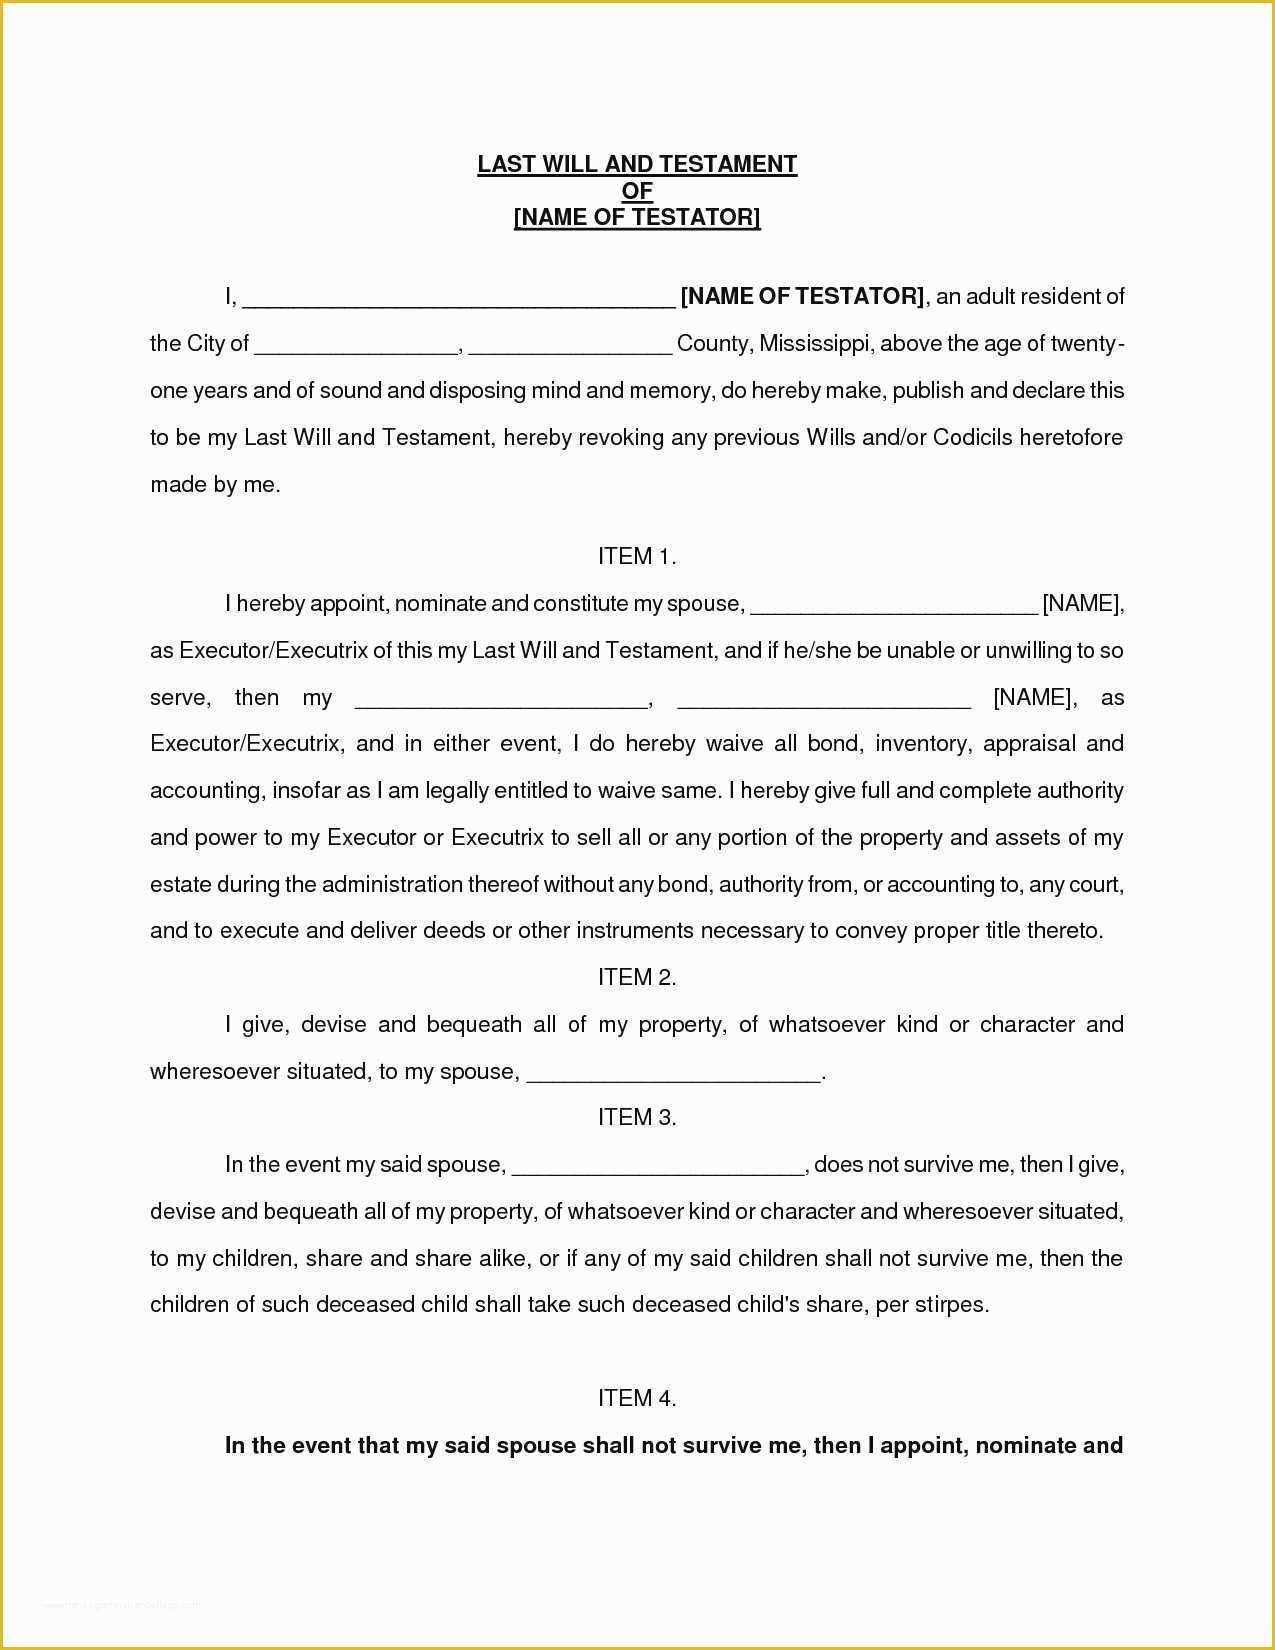 Free Last Will and Testament Template Pdf Of Unique Last Will and Testament Template Pdf Uk